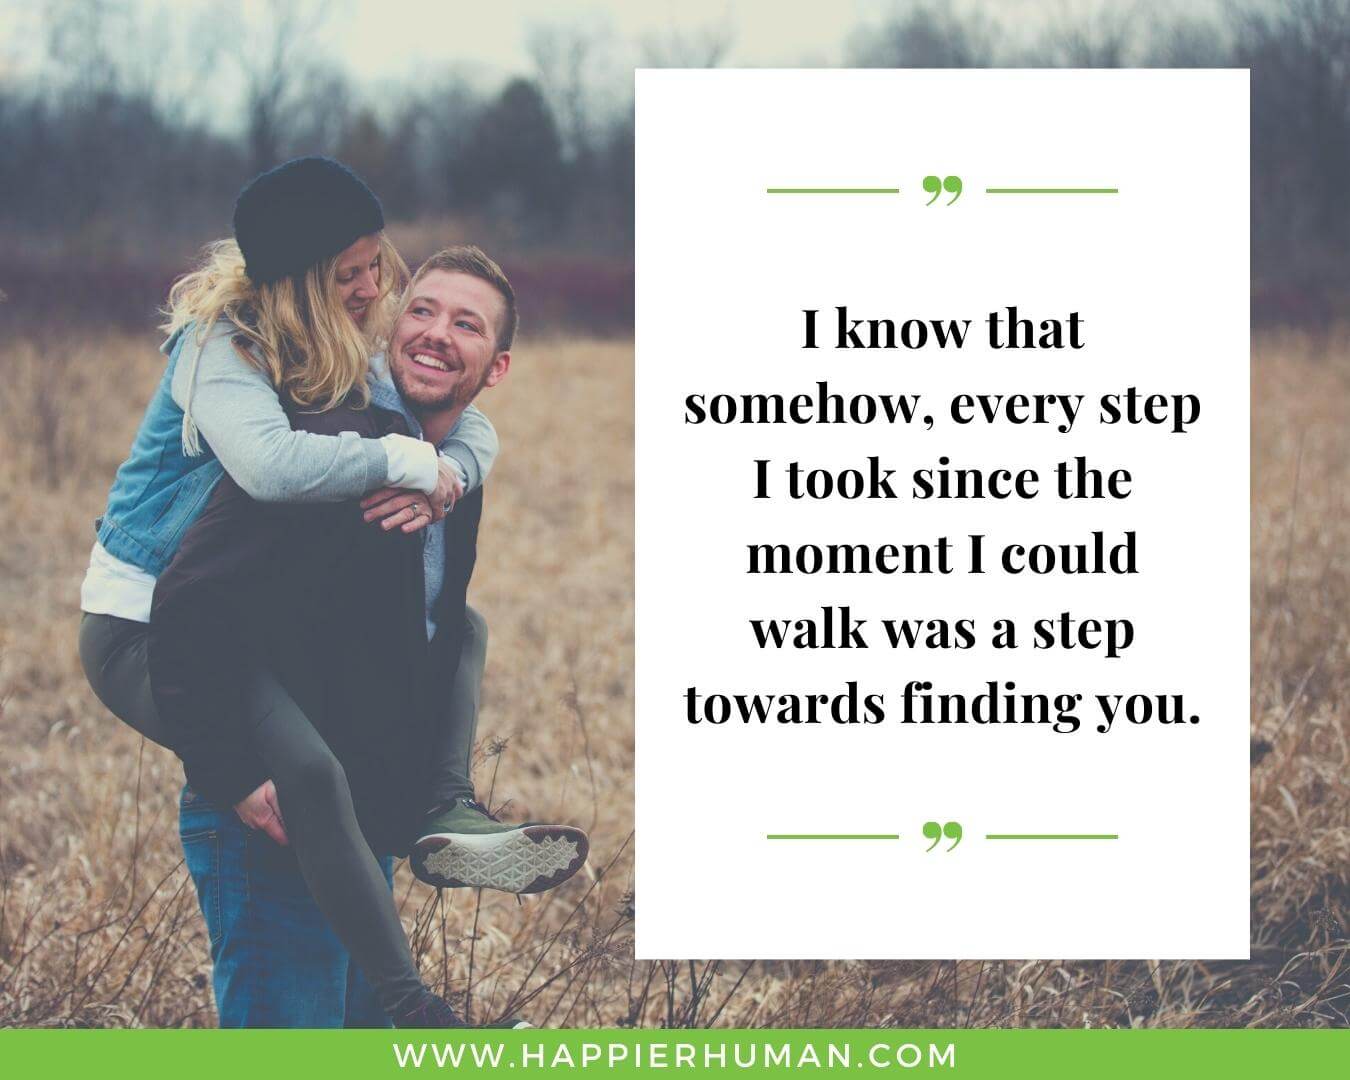 Unconditional Love Quotes for Her - “I know that somehow, every step I took since the moment I could walk was a step towards finding you.”